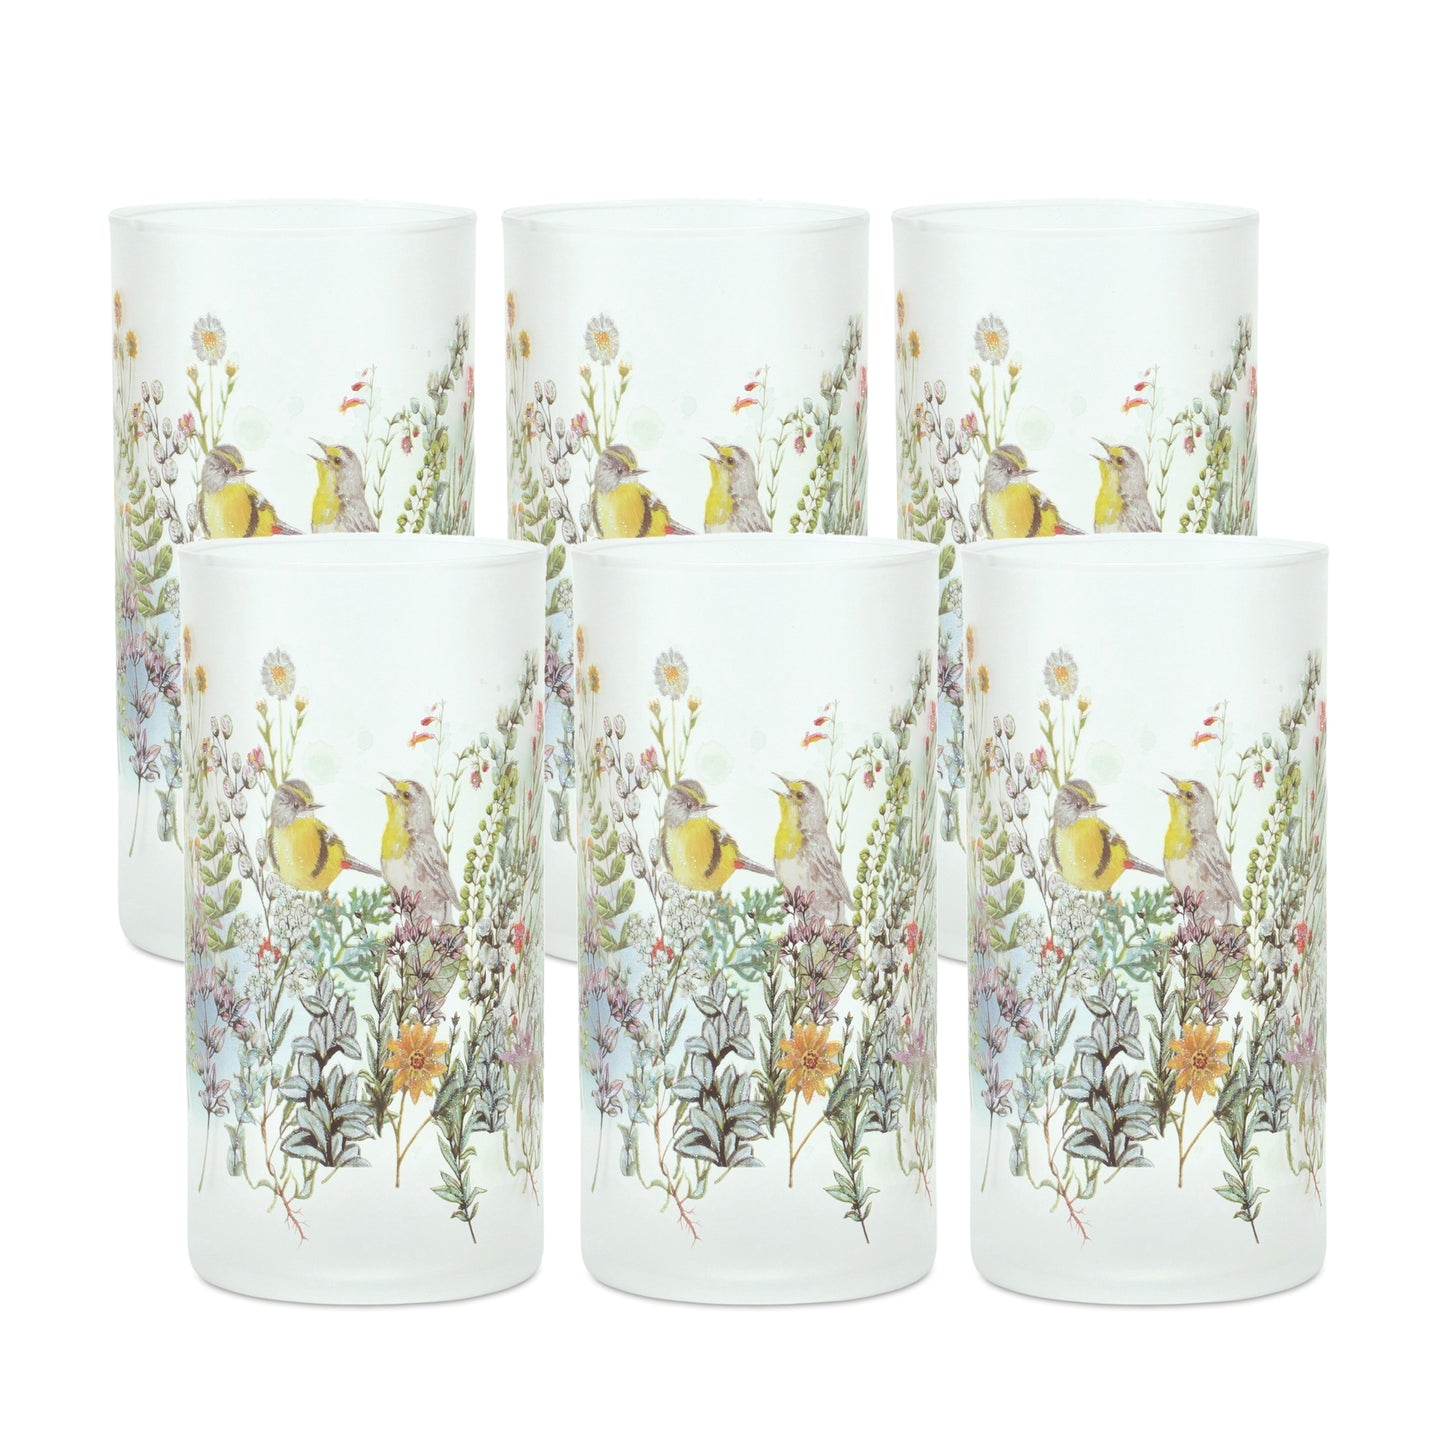 Bird and Floral Candle (Set of 6) Holder 4"D x 8"H Glass